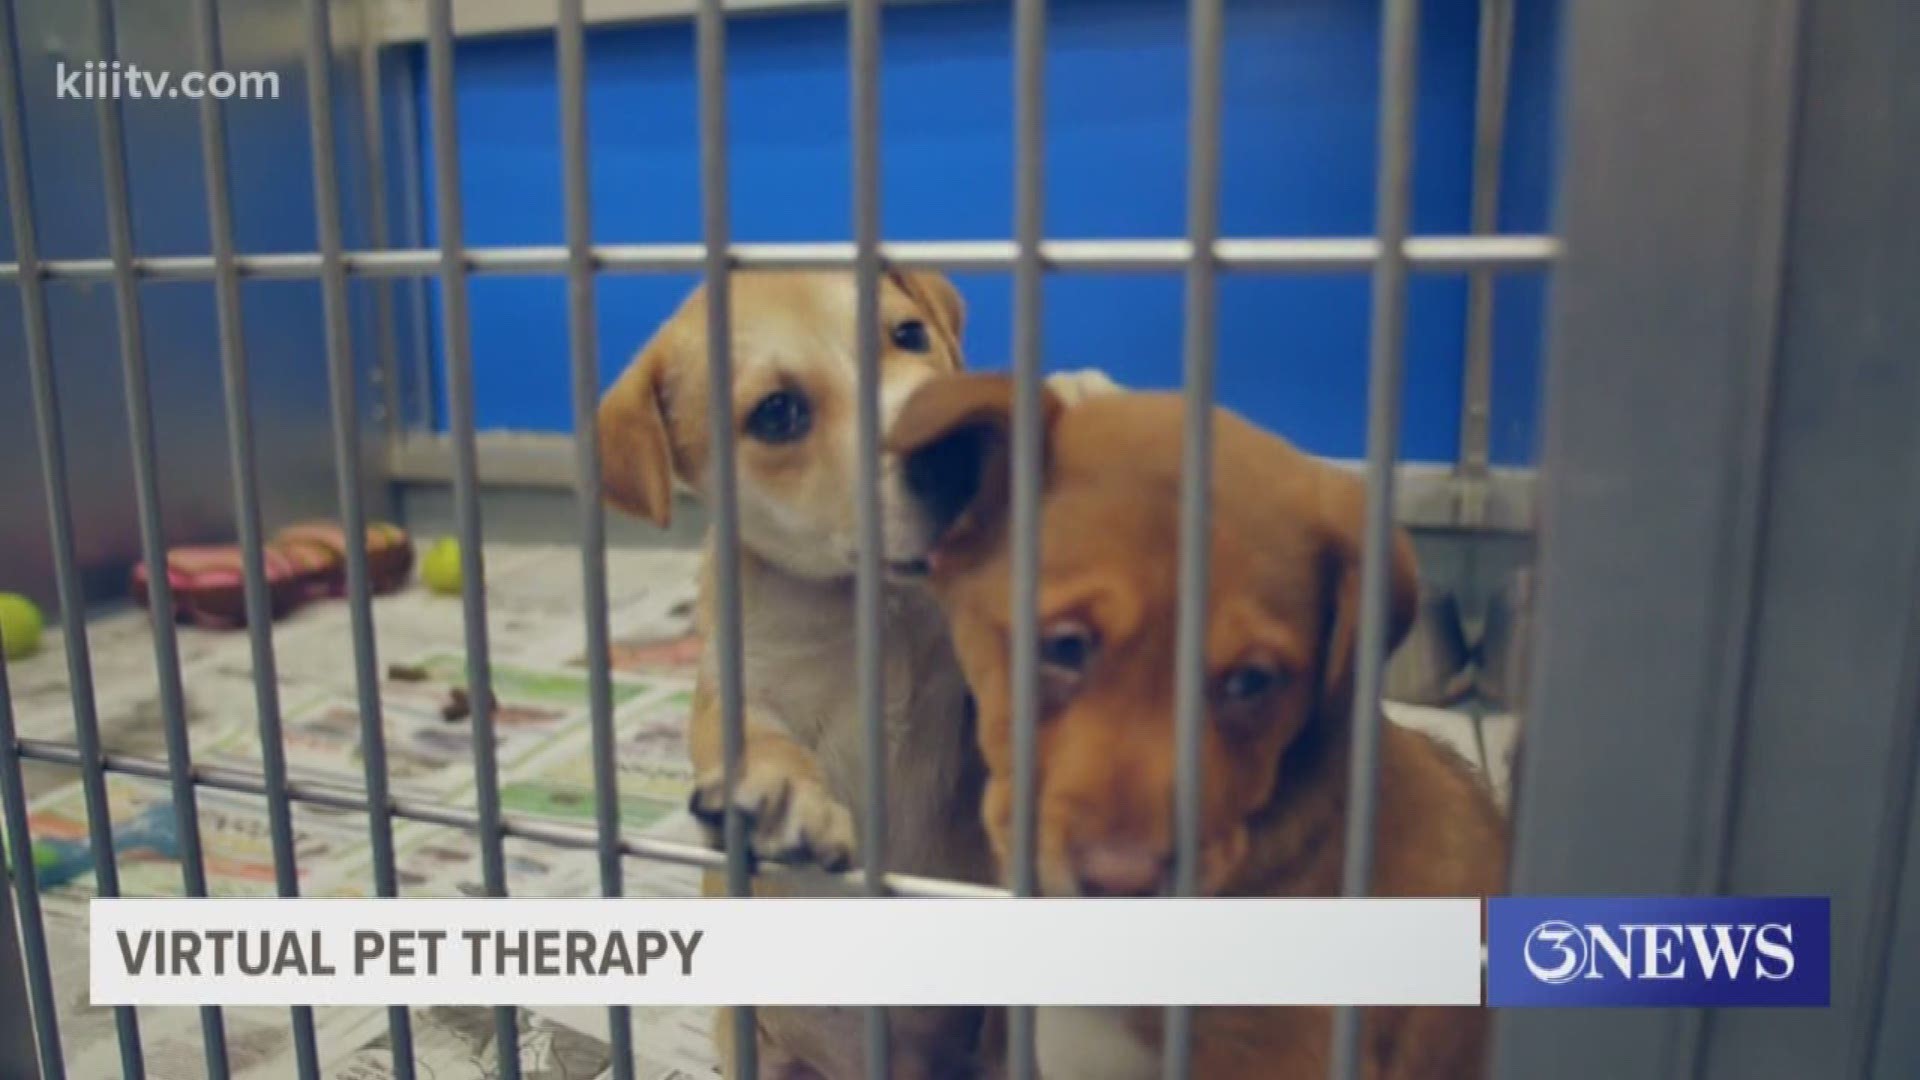 The Gulf Coast Humane Society said they recently transitioned to "virtual pet therapy" in hopes of bringing some positivity through a screen.